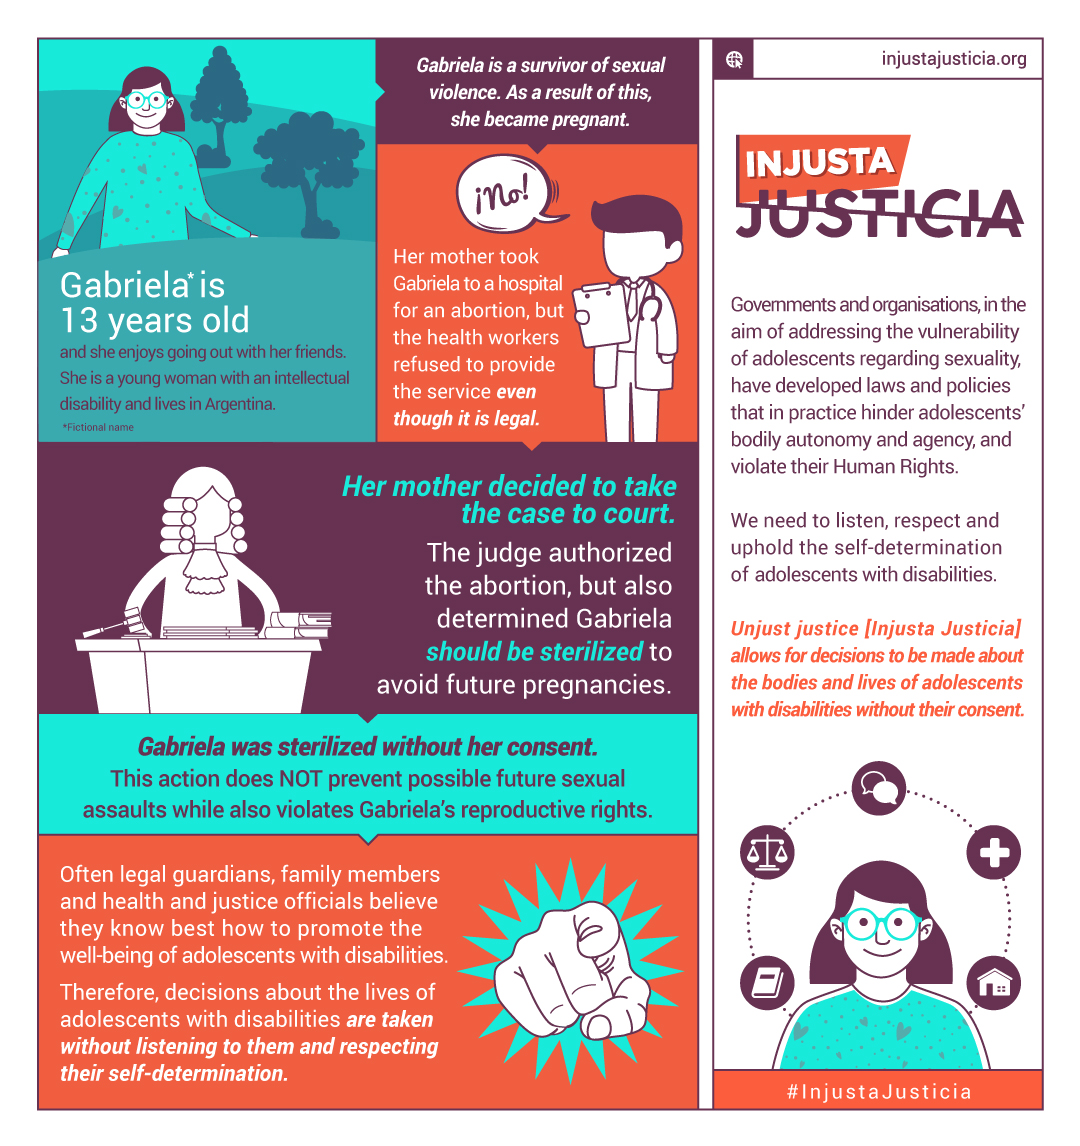 Infographic about Gabriela's case, which is explained below. Full description available for download.